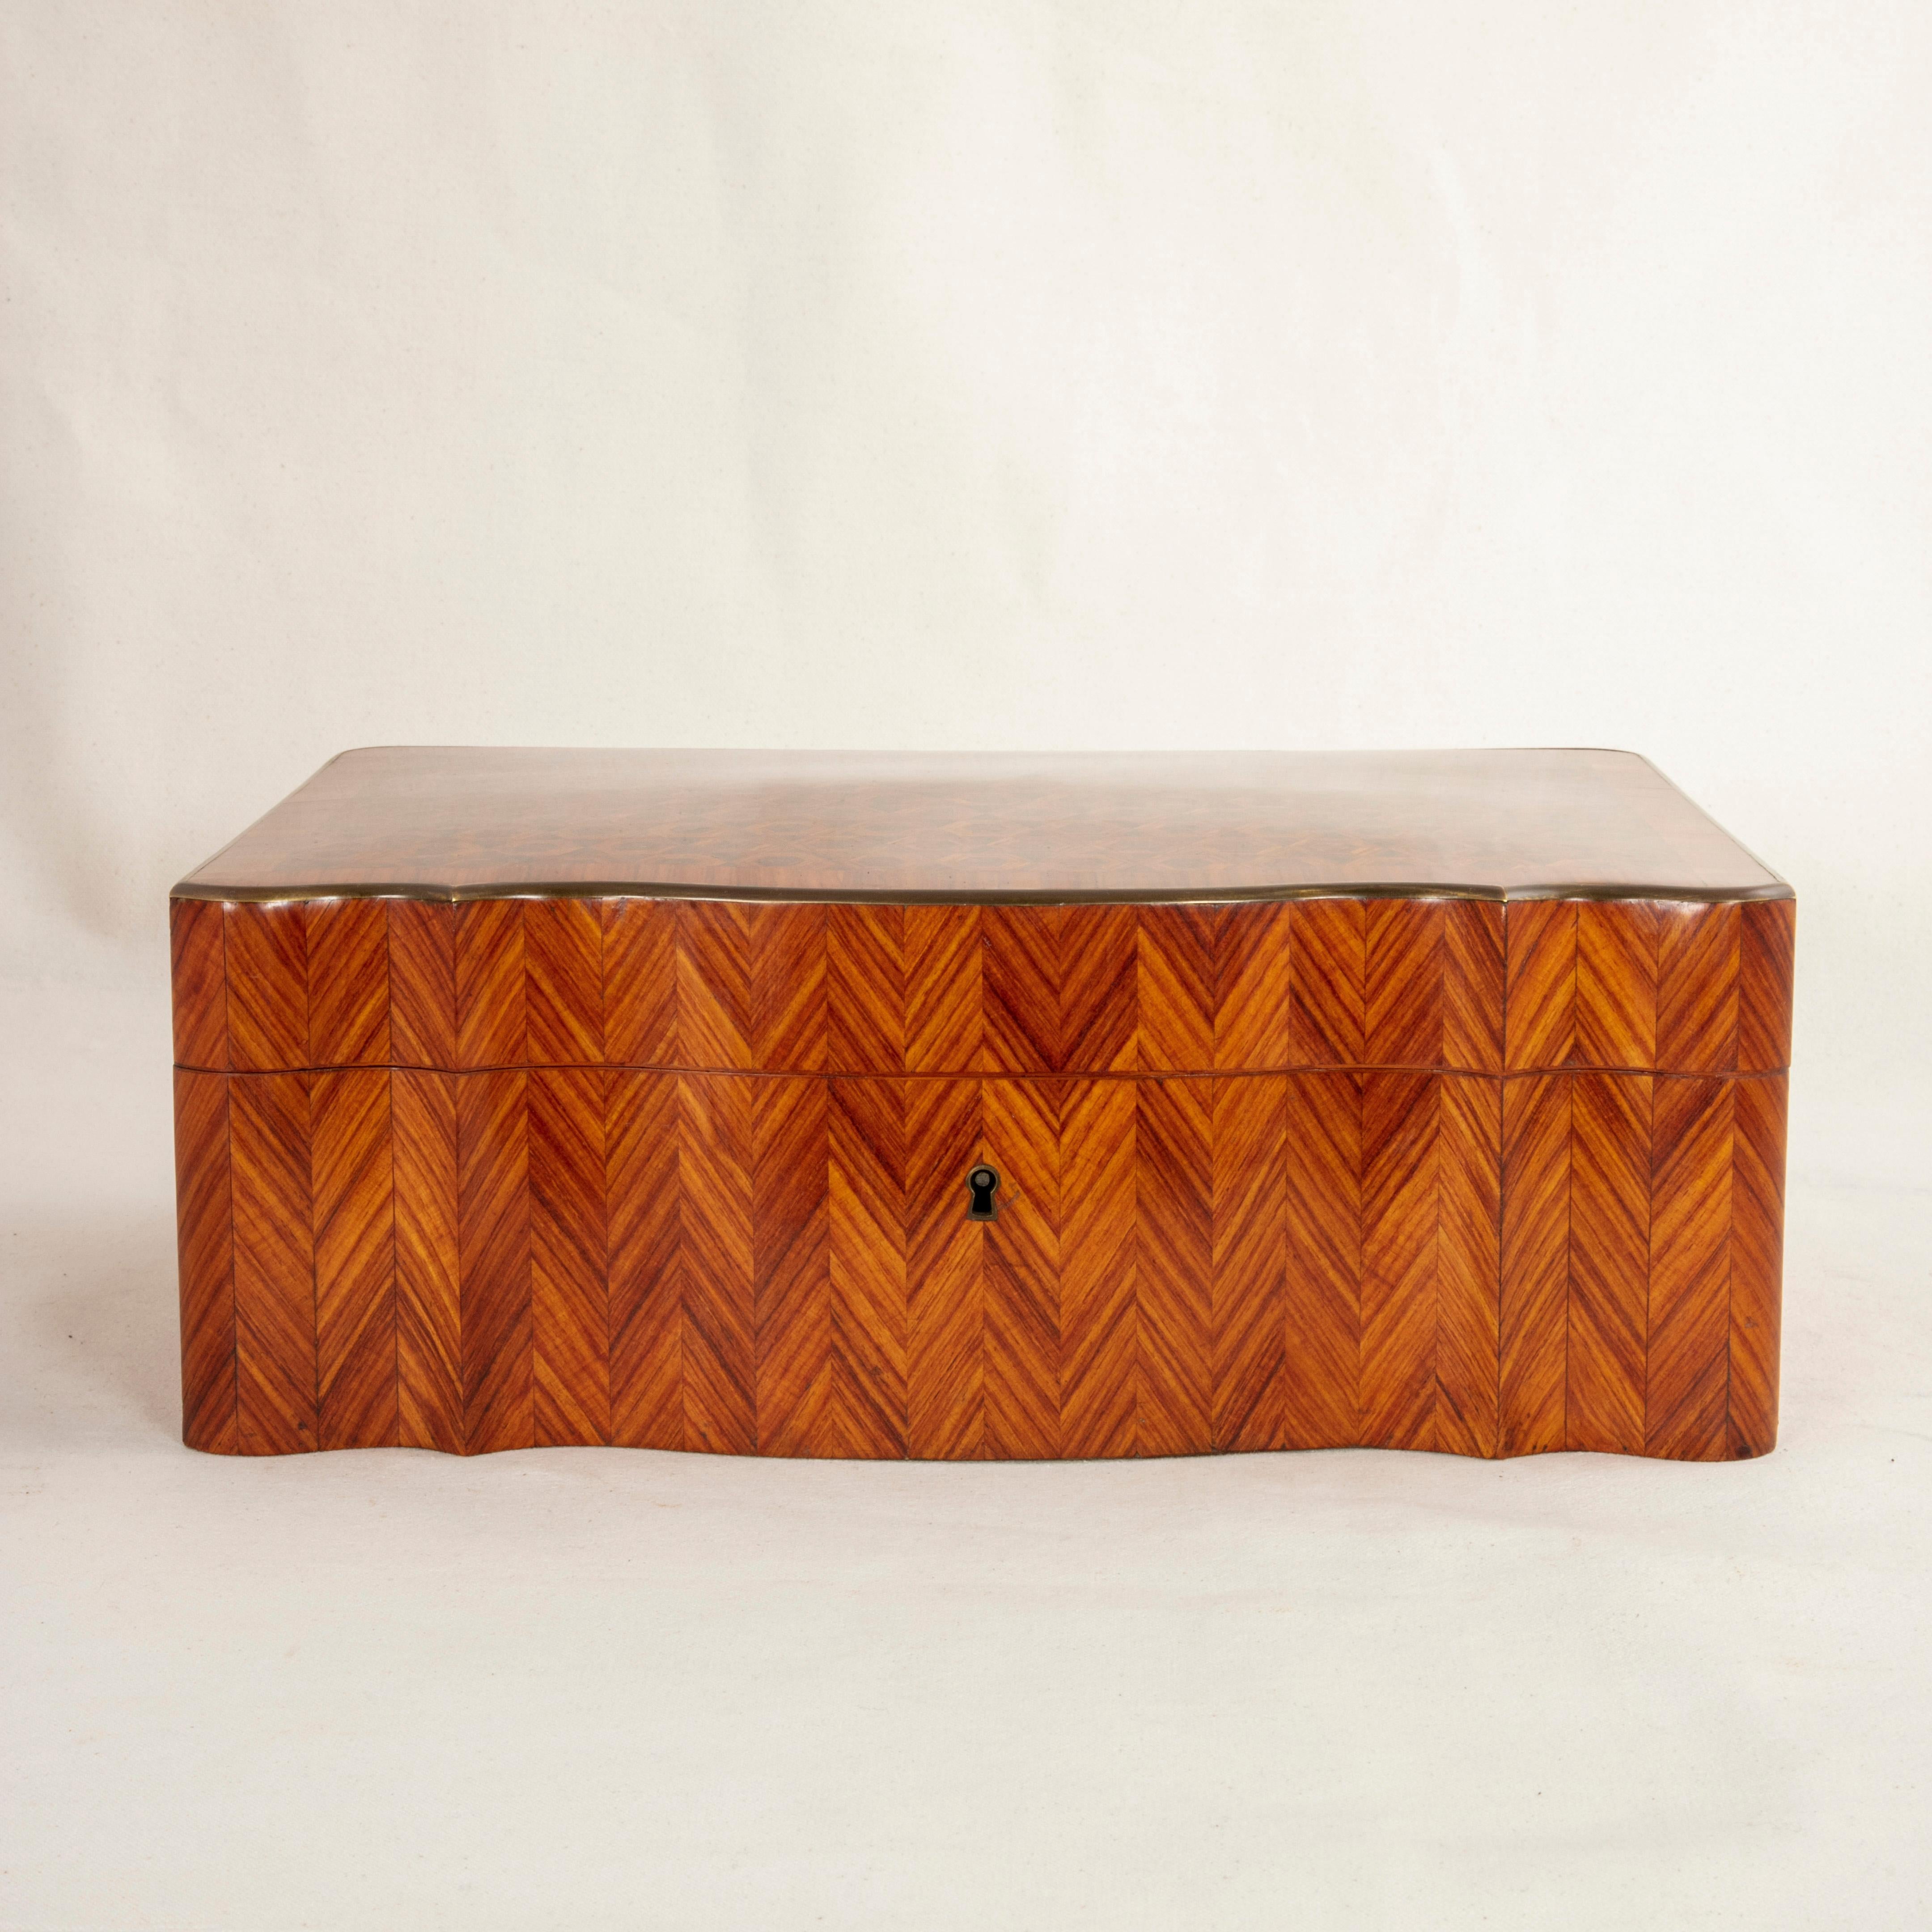 This large mid-19th century French Napoleon III rosewood box features a curved front and an hexagonal marquetry pattern on the top with a bronze rim around the lid. The sides are striated with alternating grain patterns to create chevrons. The